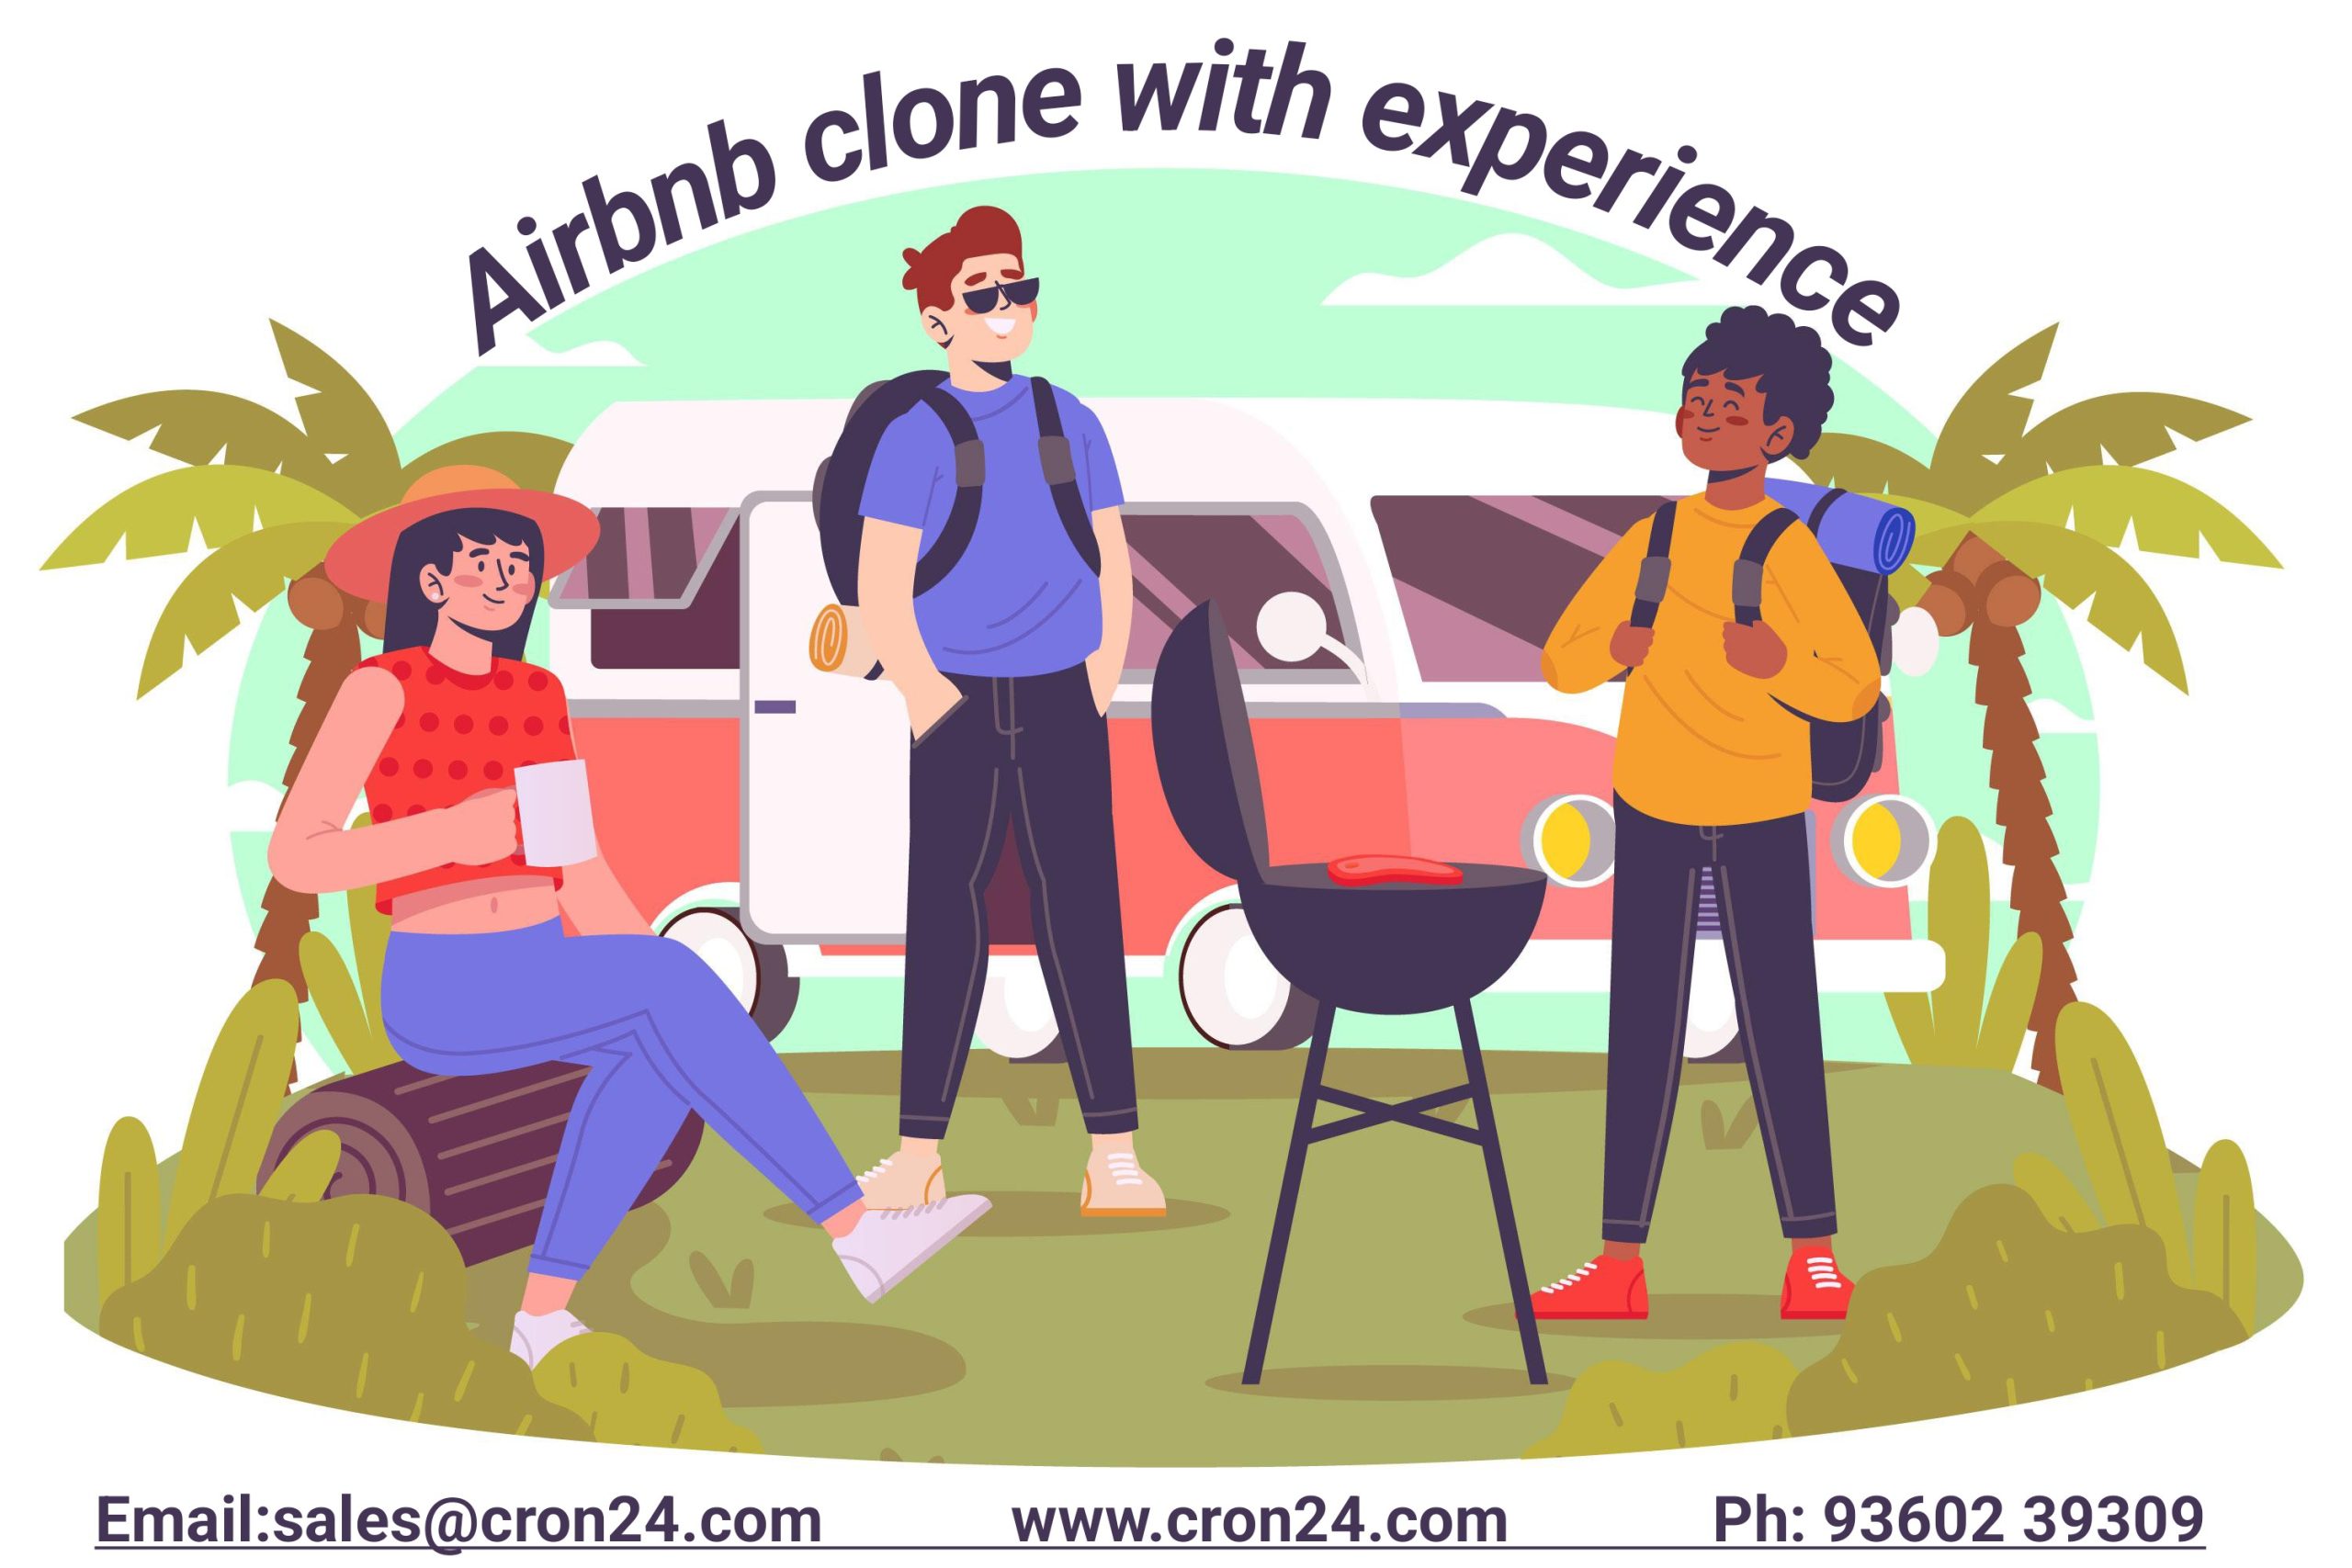 How To Choose A Best Airbnb Clone Script With Experience